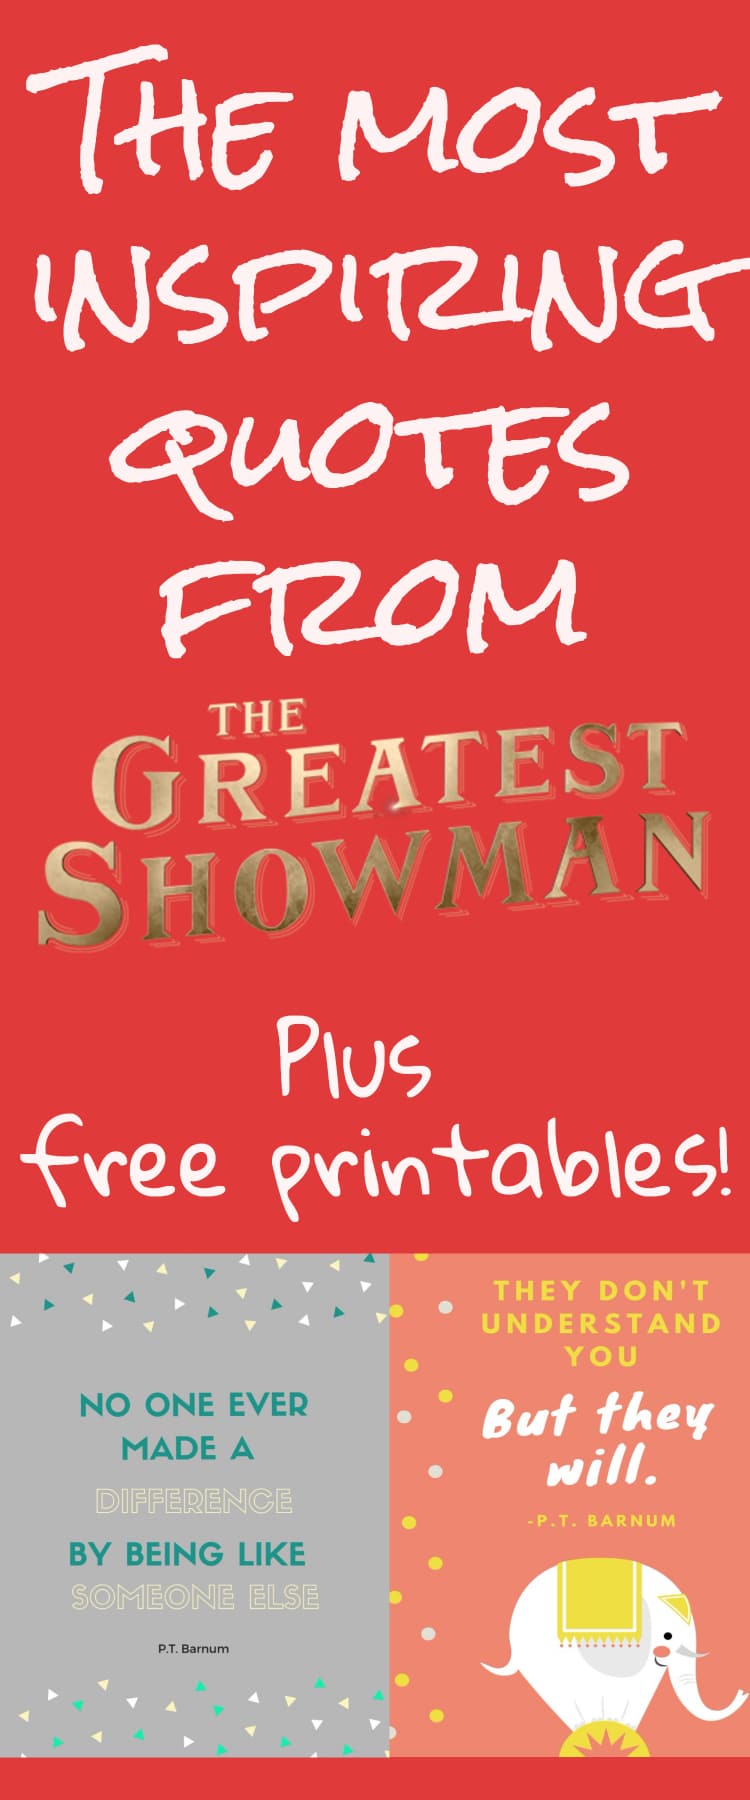 The Greatest Showman / Greatest showman quotes / inspiration / inspiring quotes / motivational quotes / free printables / #printables #quote #inspiration